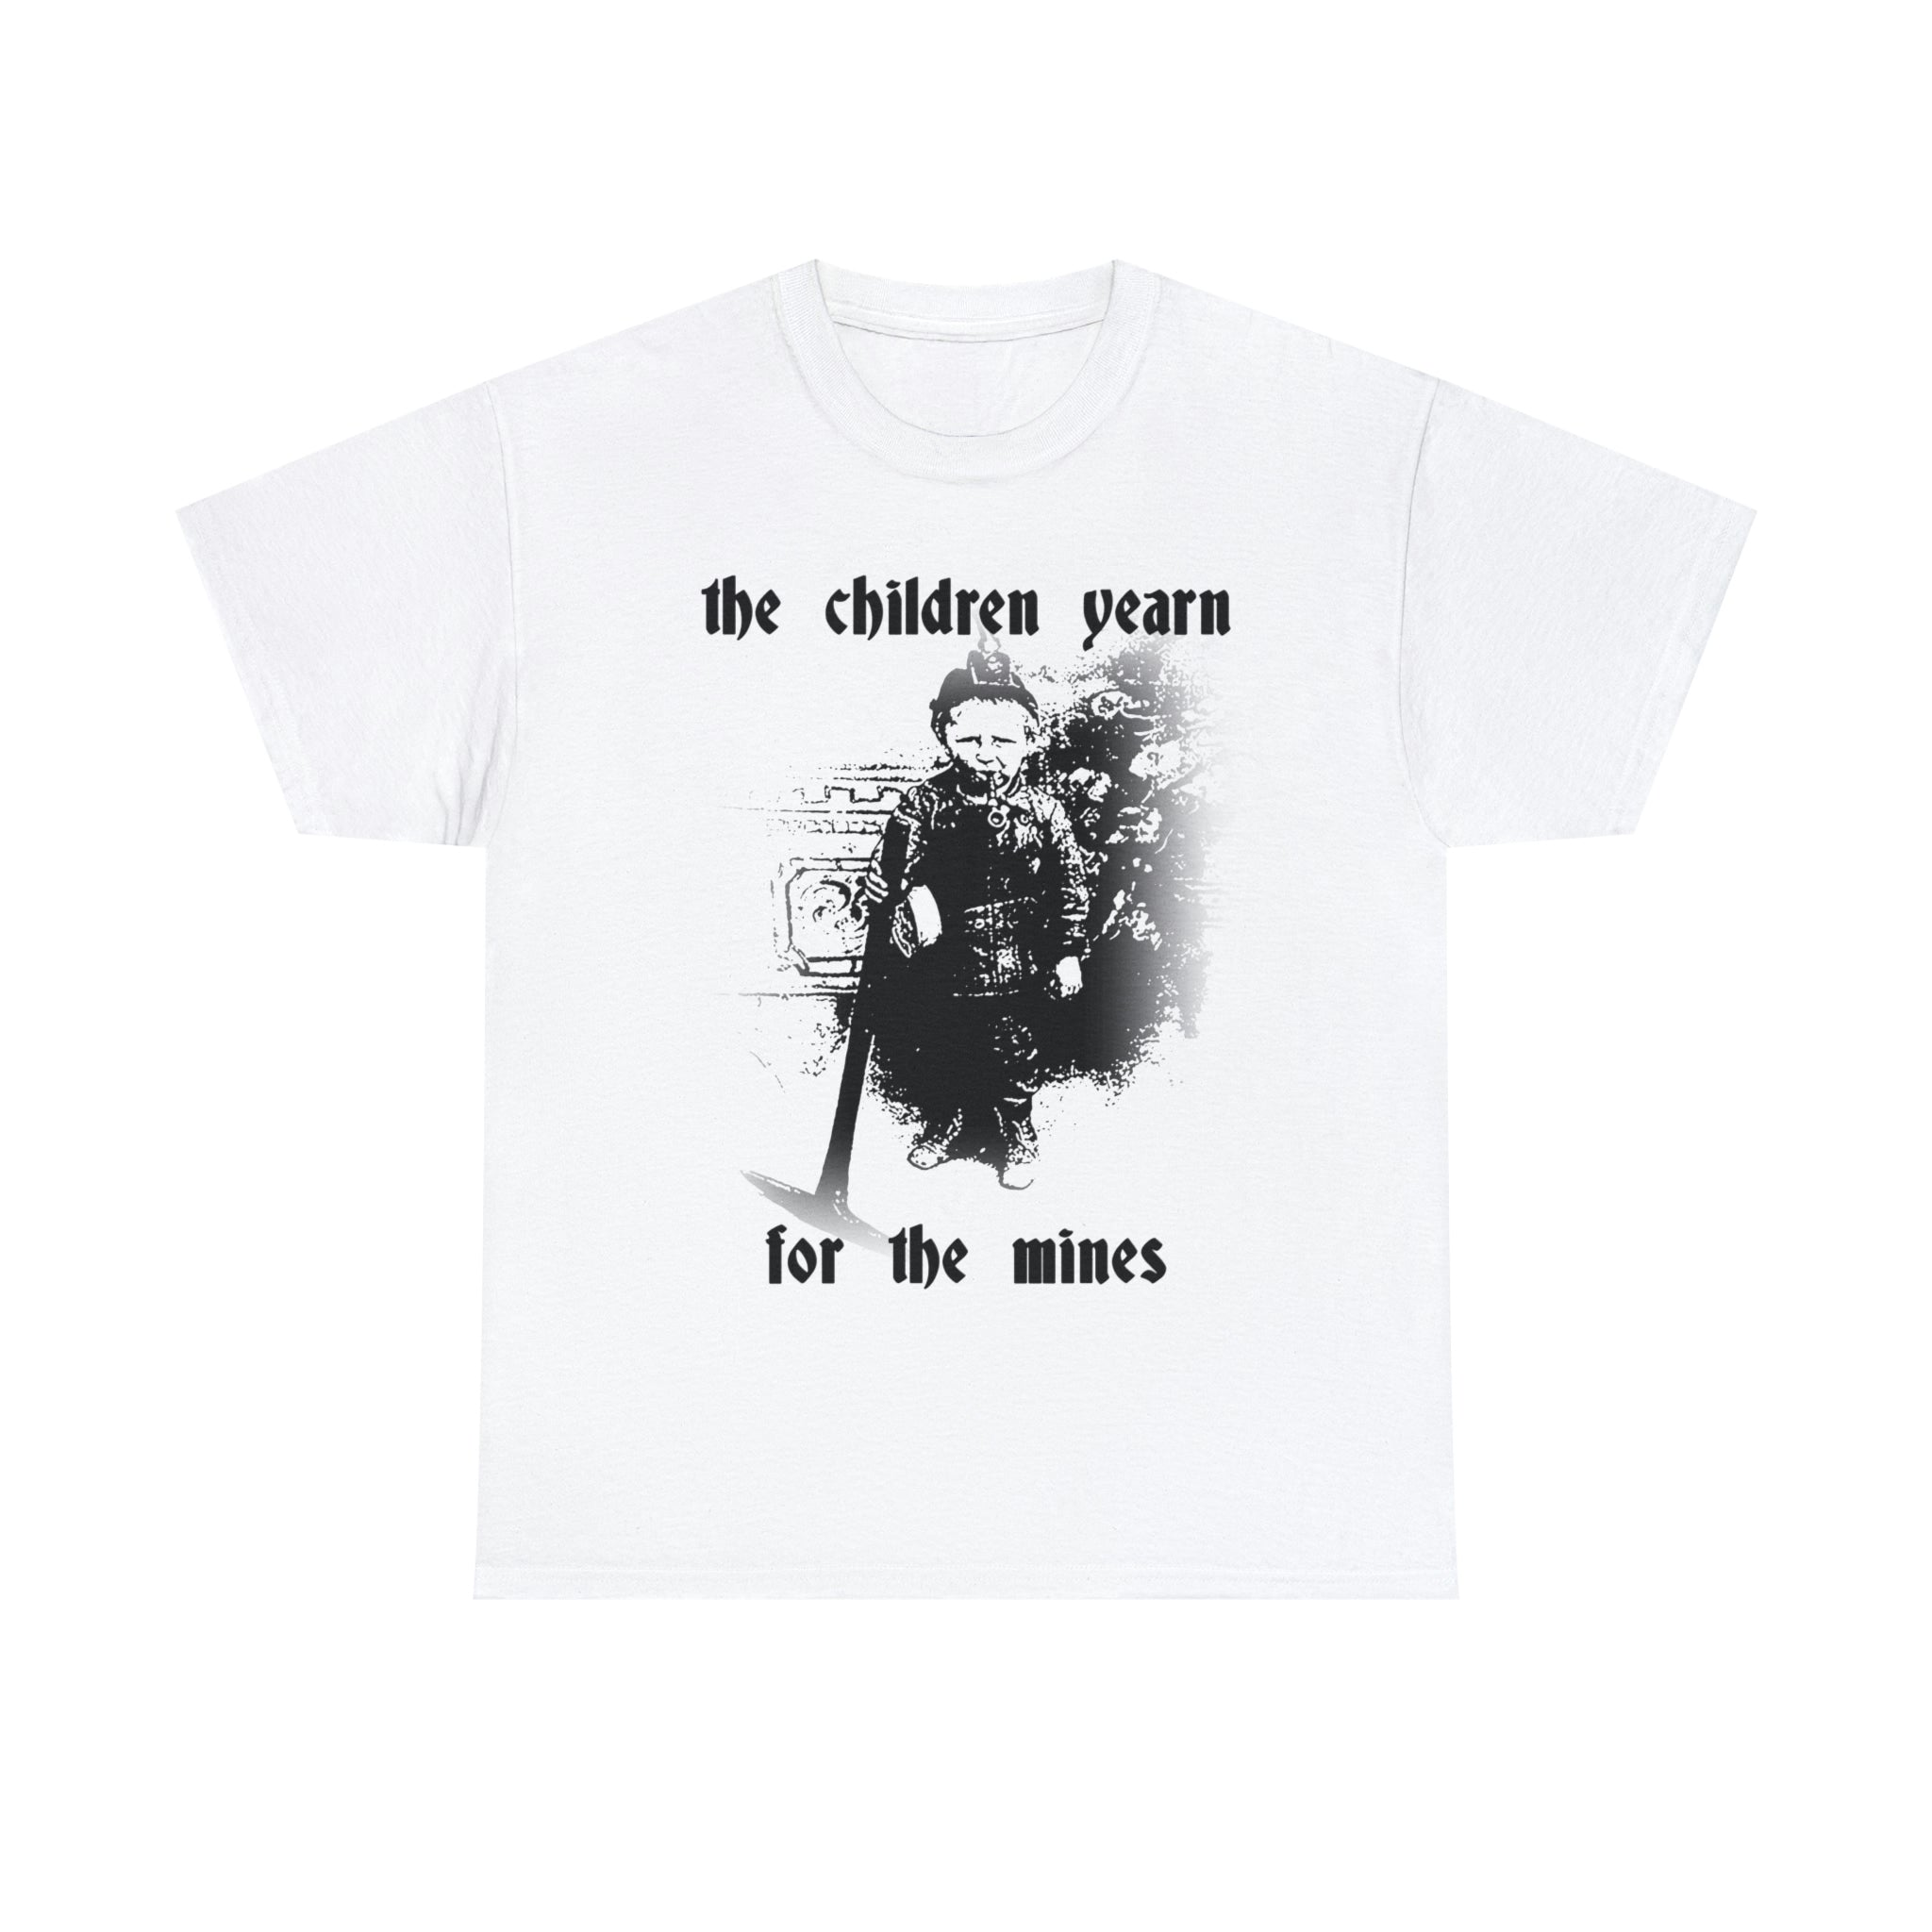 "The children yearn for the mines" t